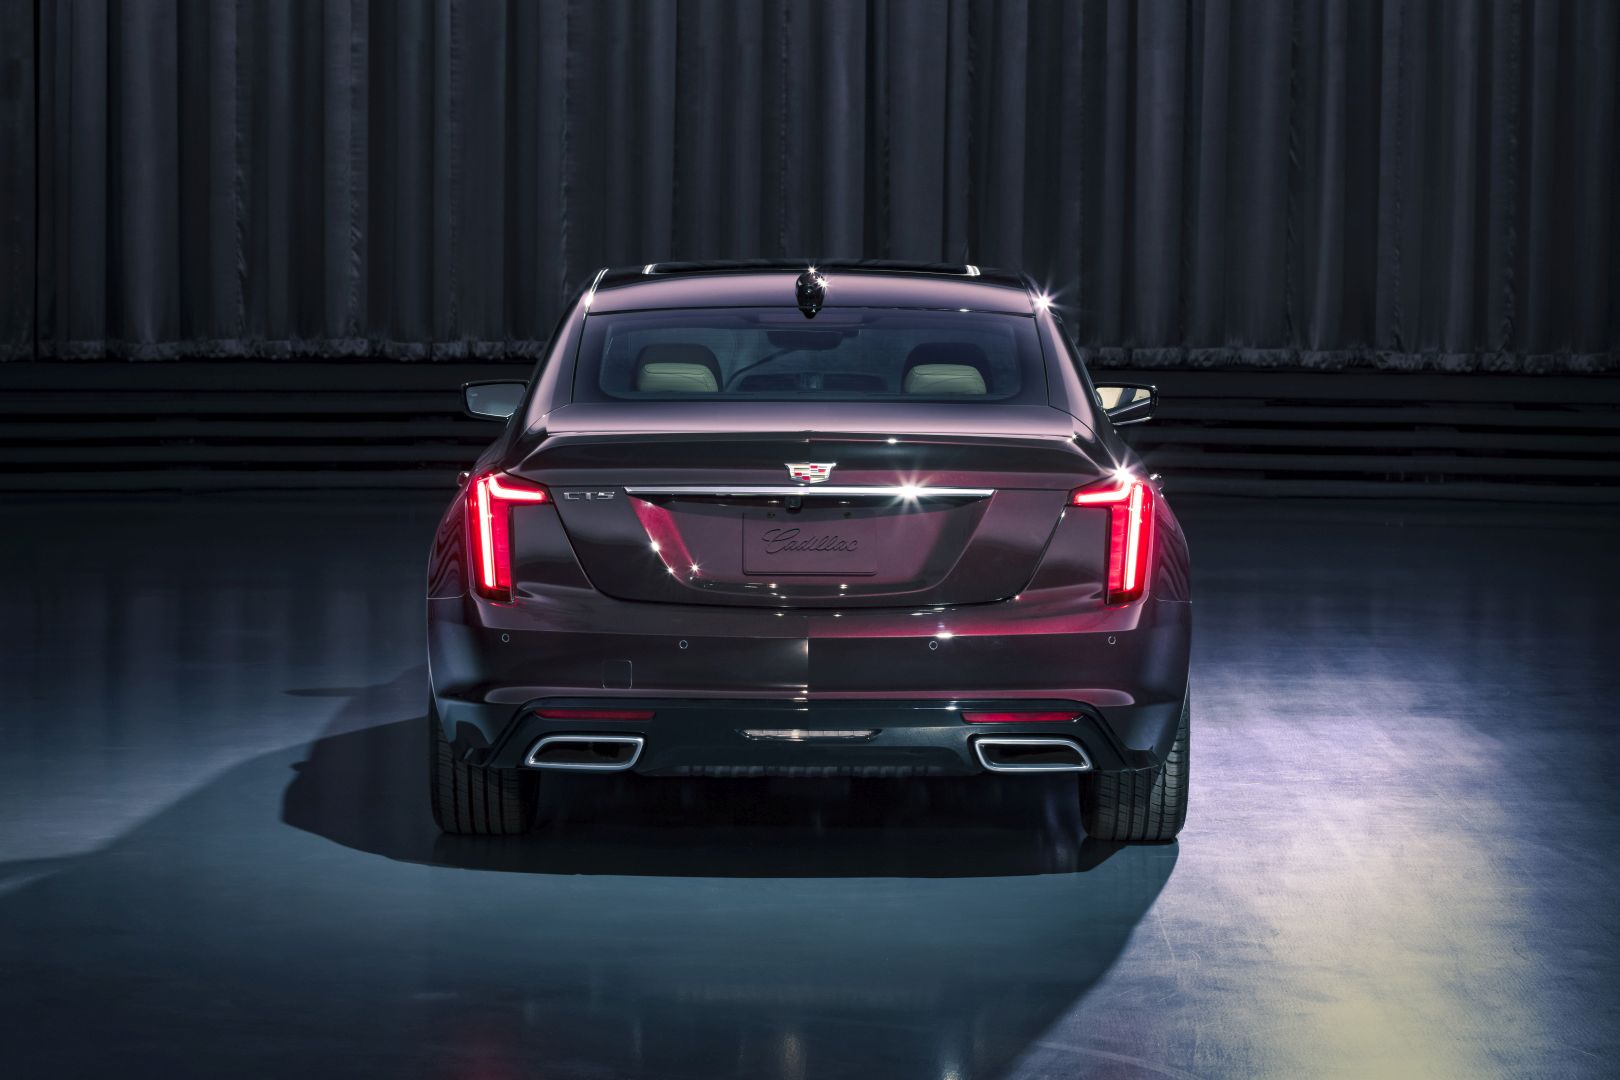 https://s1.cdn.autoevolution.com/images/news/gallery/over-34000-cadillac-ct4-and-ct5s-to-be-recalled-for-airbags_28.jpg